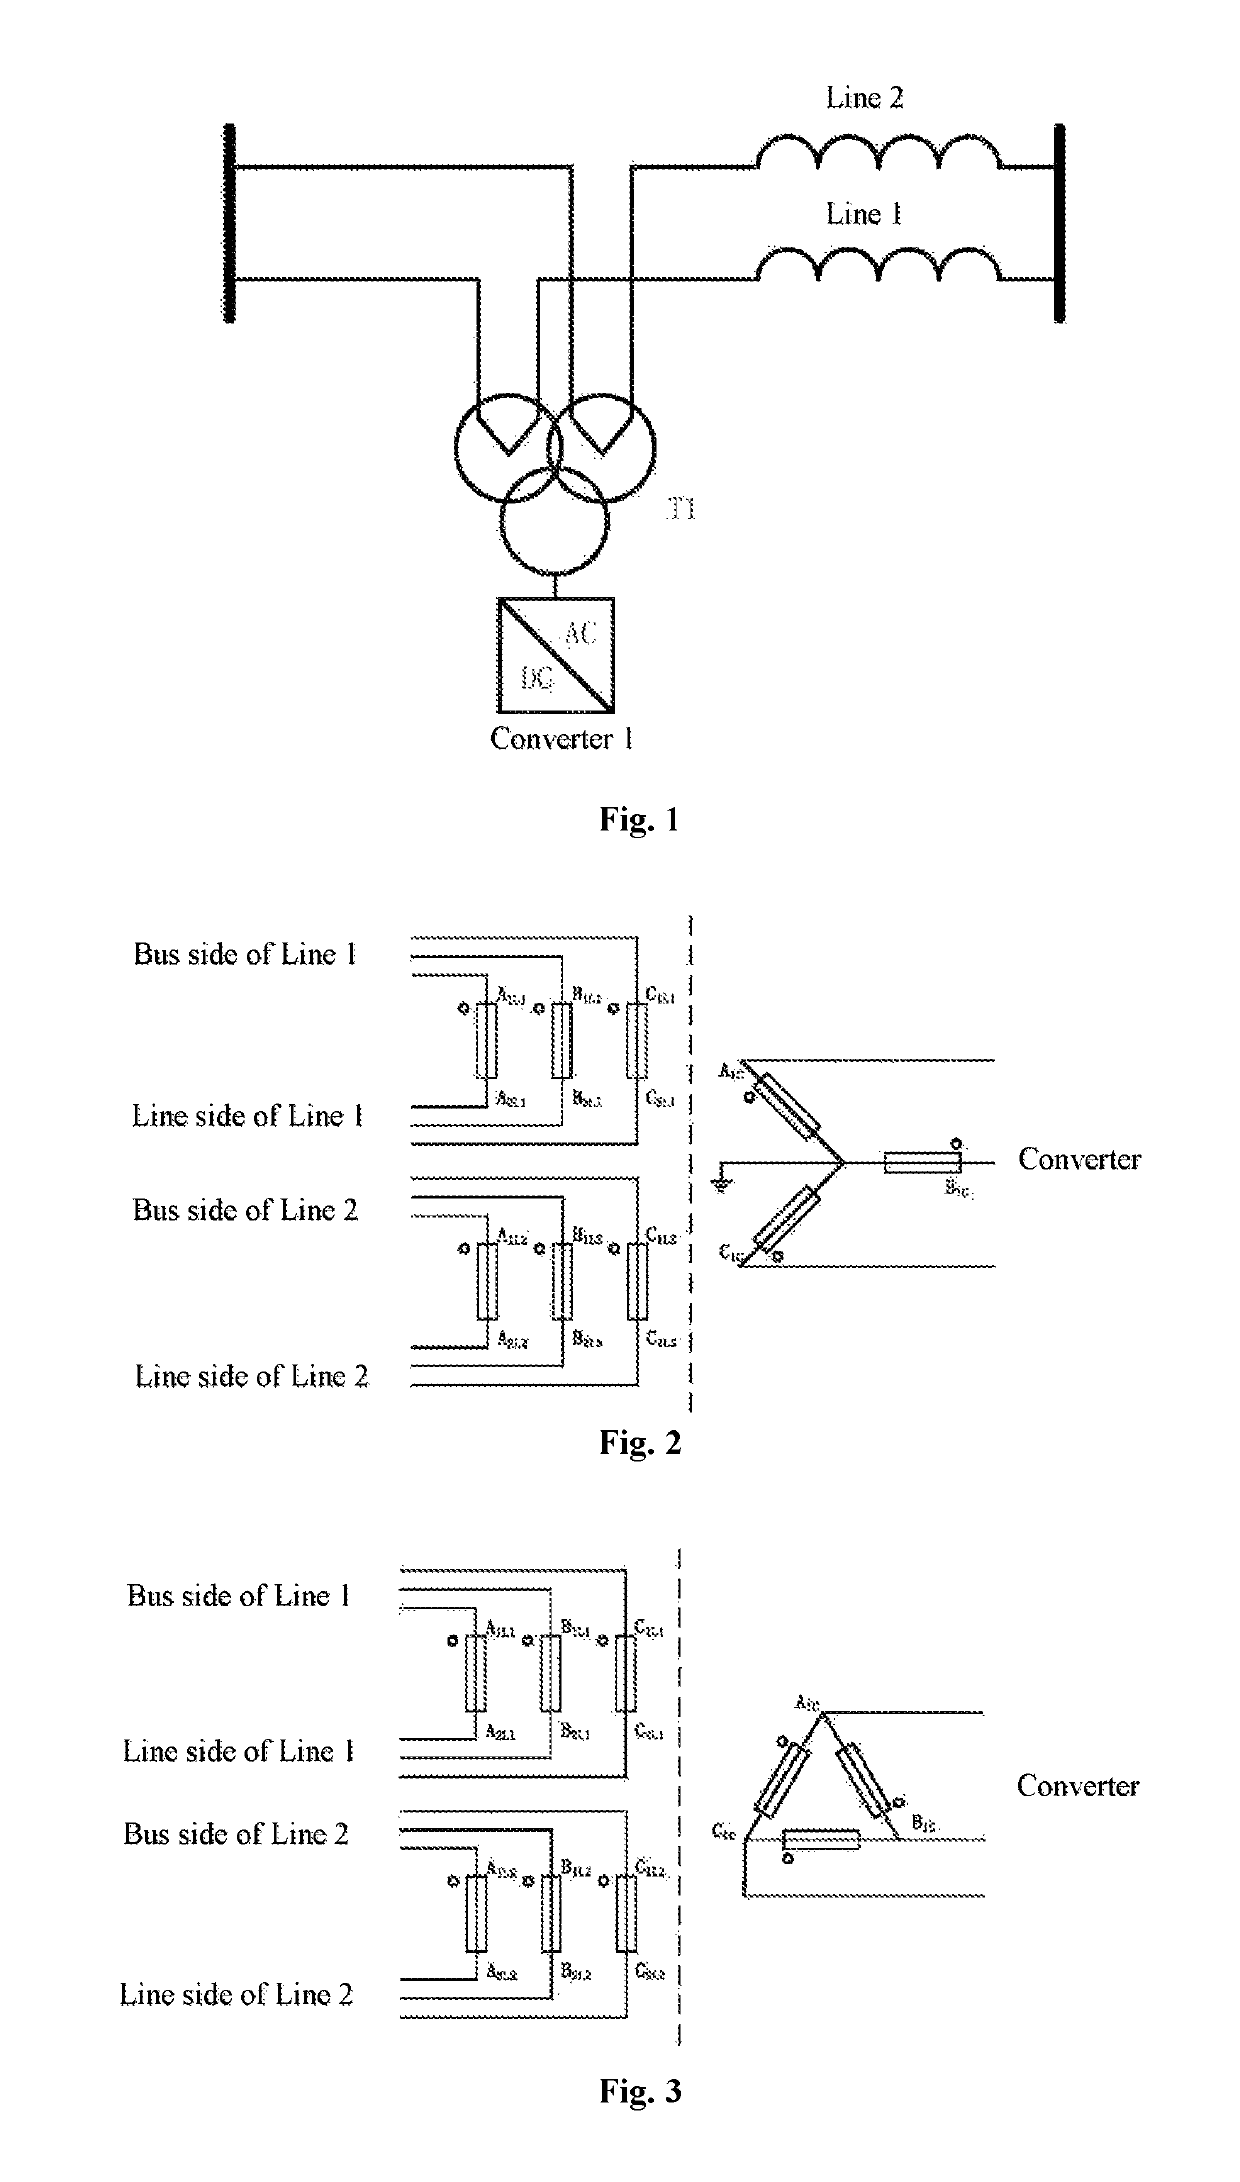 Series compensation device applicable to double-circuit line